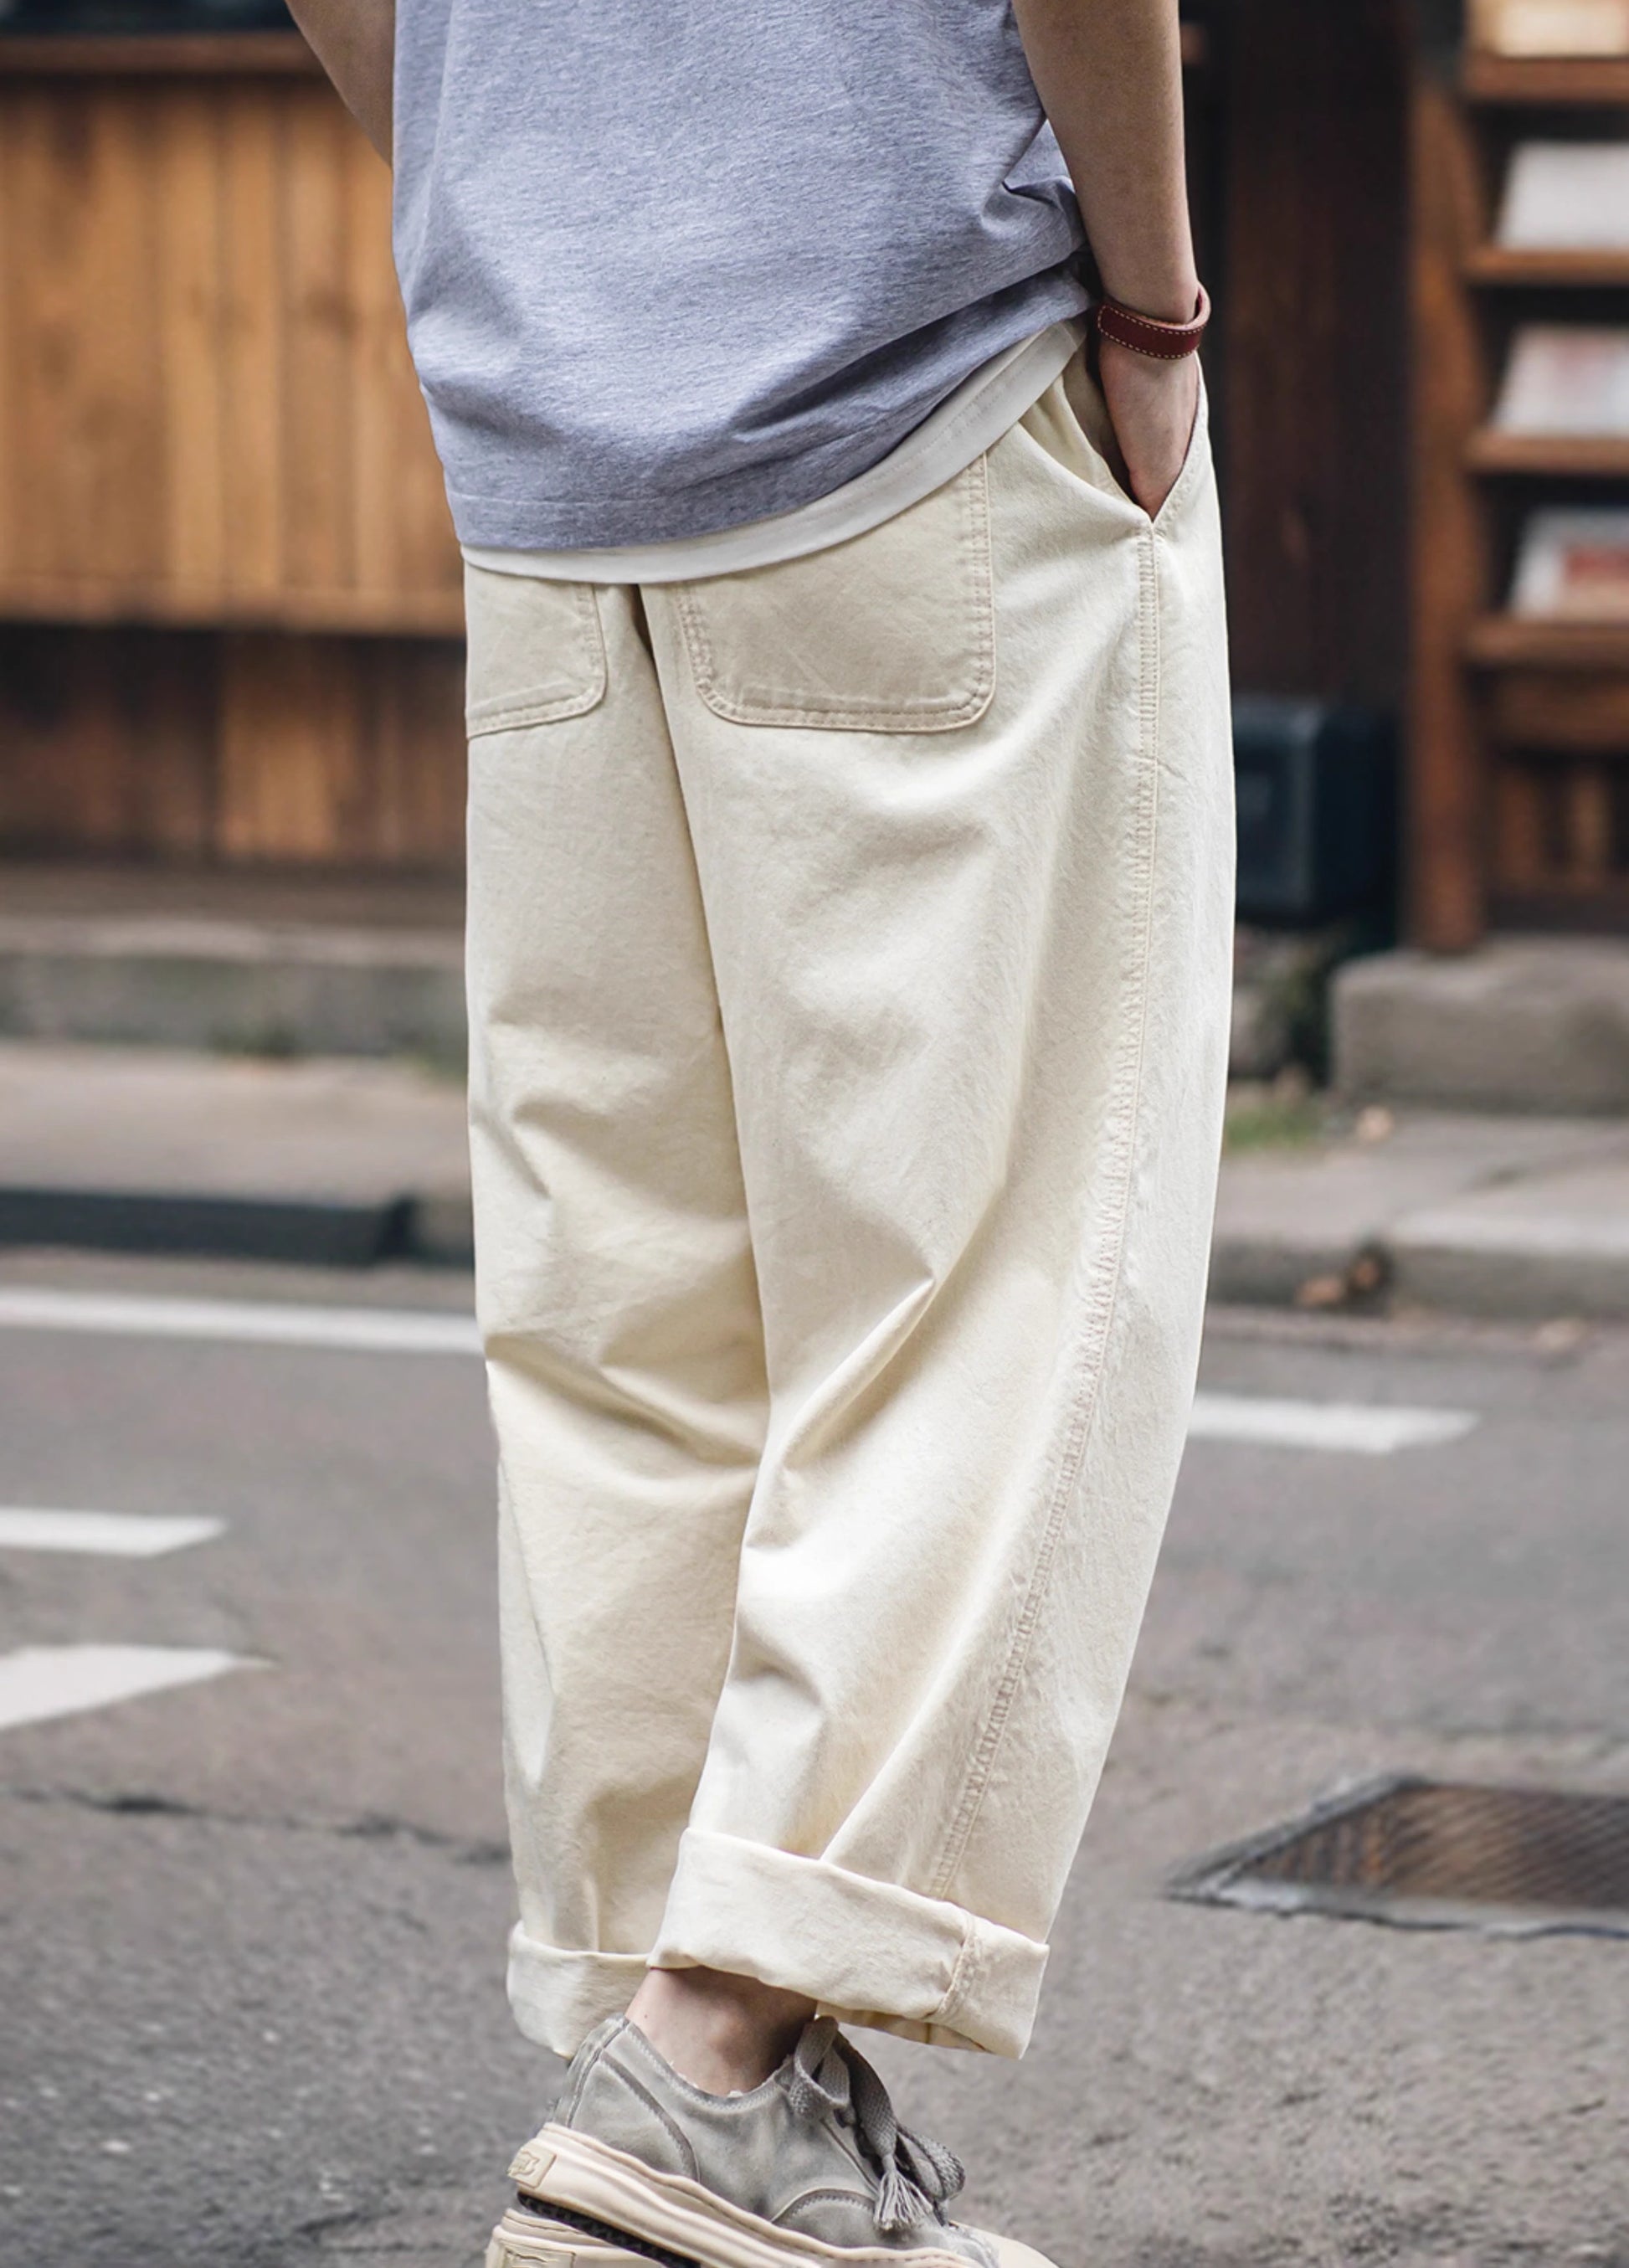 American Retro Cottonseed Shell Deck City Boy Wide-Leg Men's Trousers - Harmony Gallery